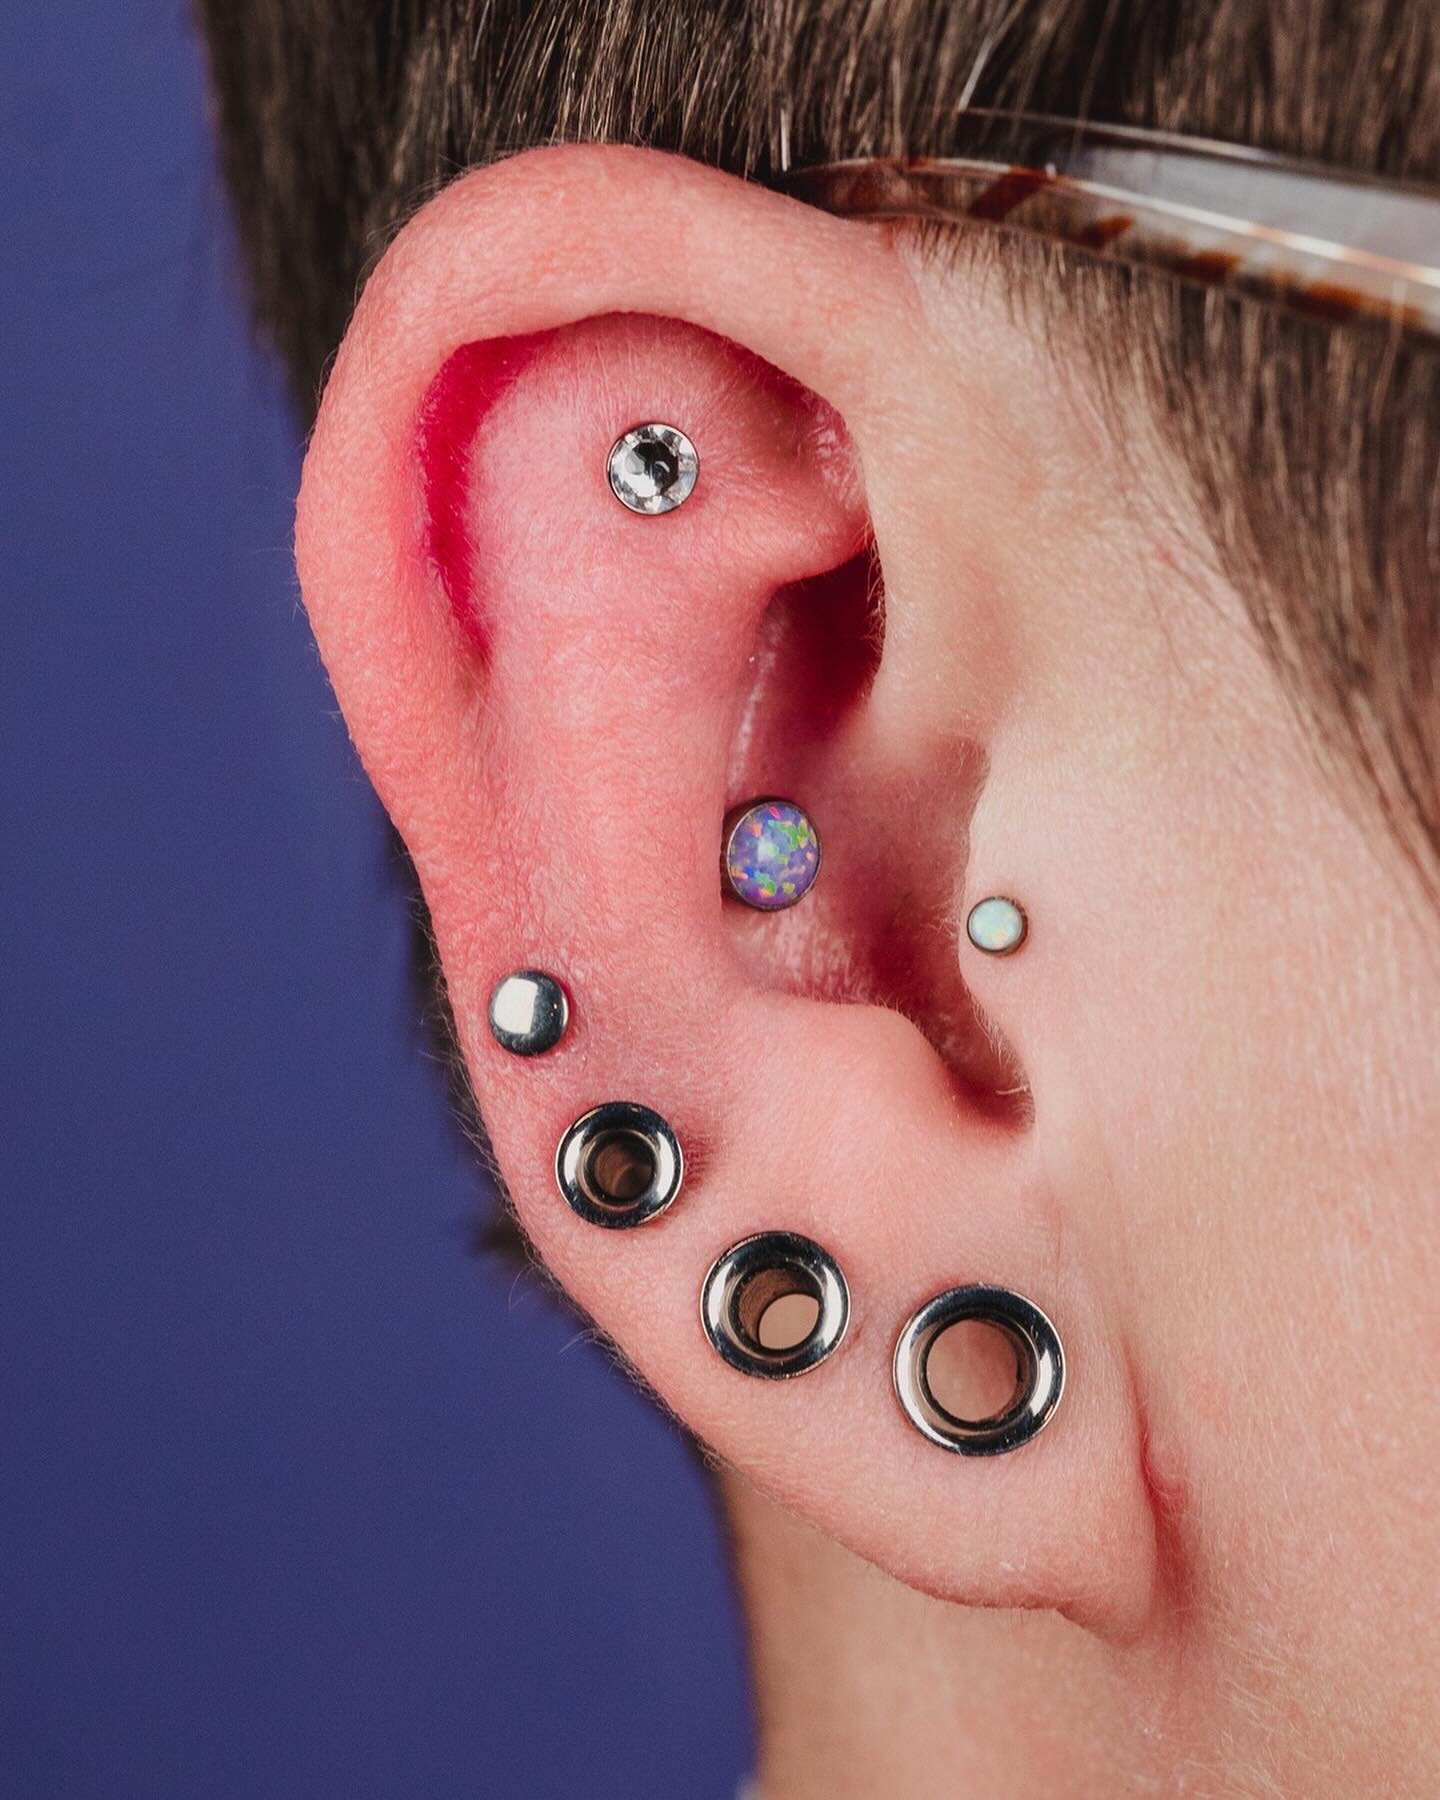 FELL ALL☄️
 
HEARTS COLLAPSE
 
William got to add some more titanium to Stacey&rsquo;s ear to match the eyelets in all her stretched lobes! A gem in the flat and a classic disk in the mid helix to make a cool size gradient going up the ear! 👻⛓️&zwj;